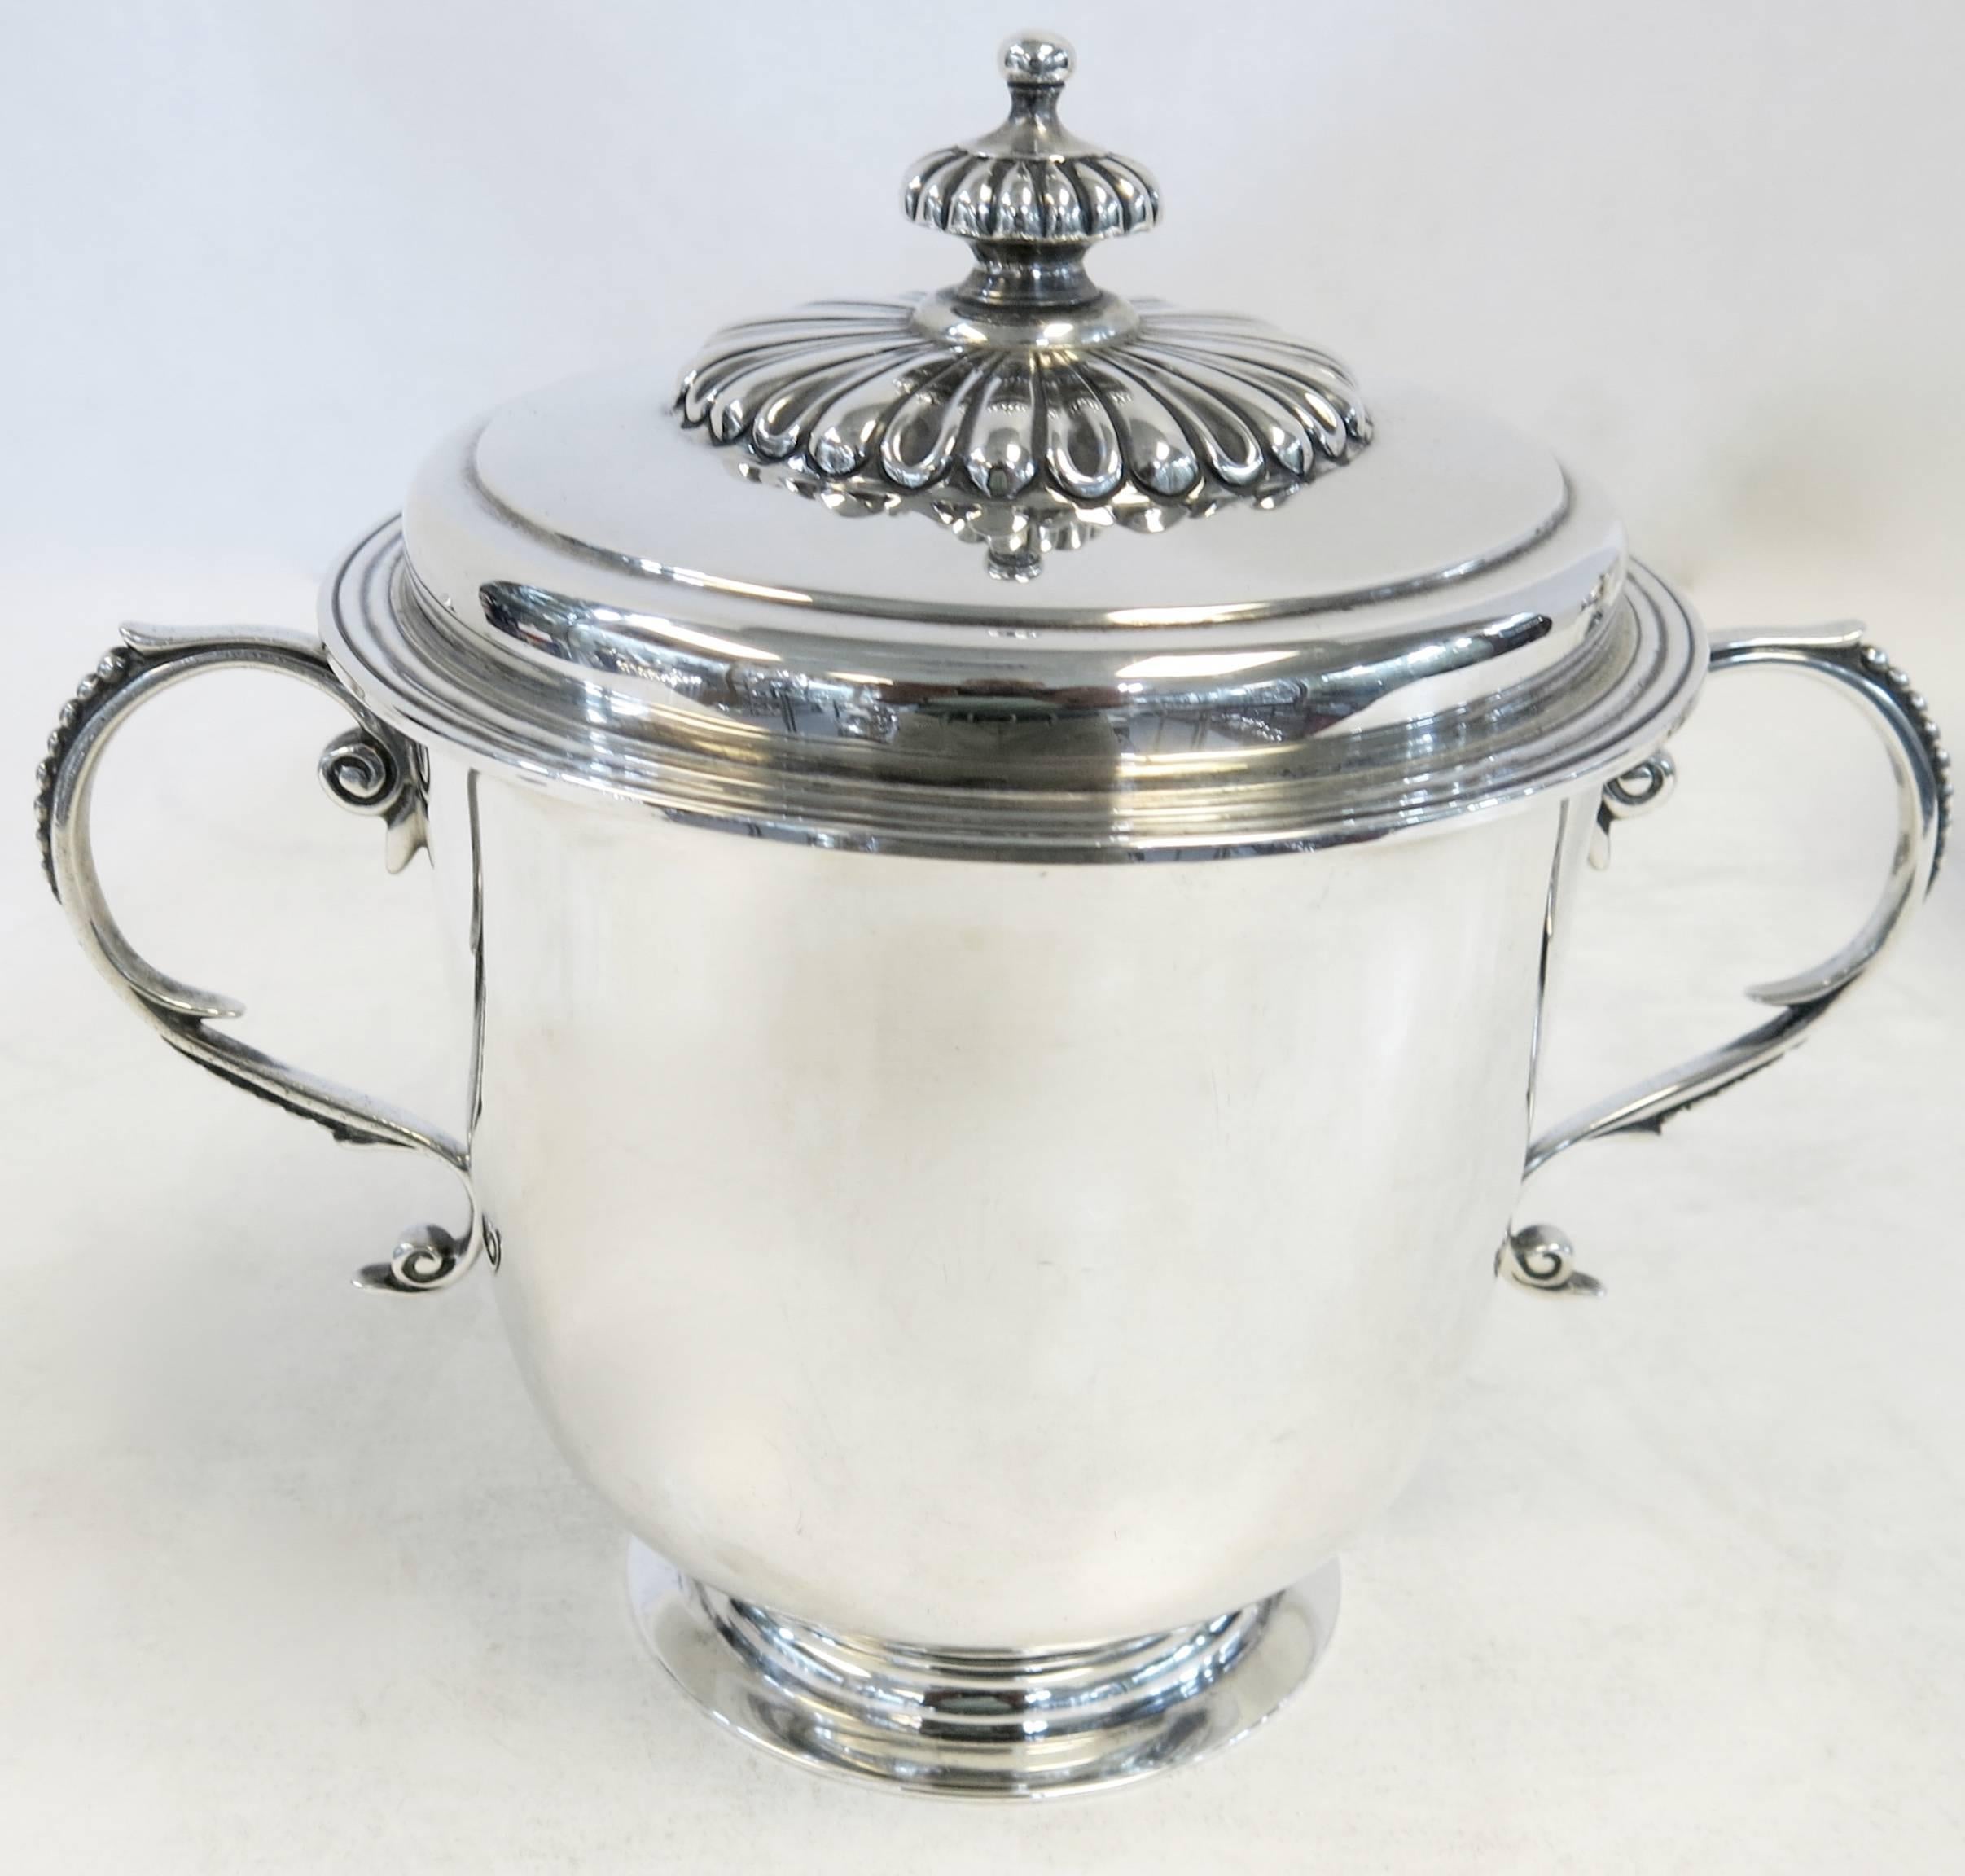 English Good Quality Pair of Sterling Silver Cup and Covers